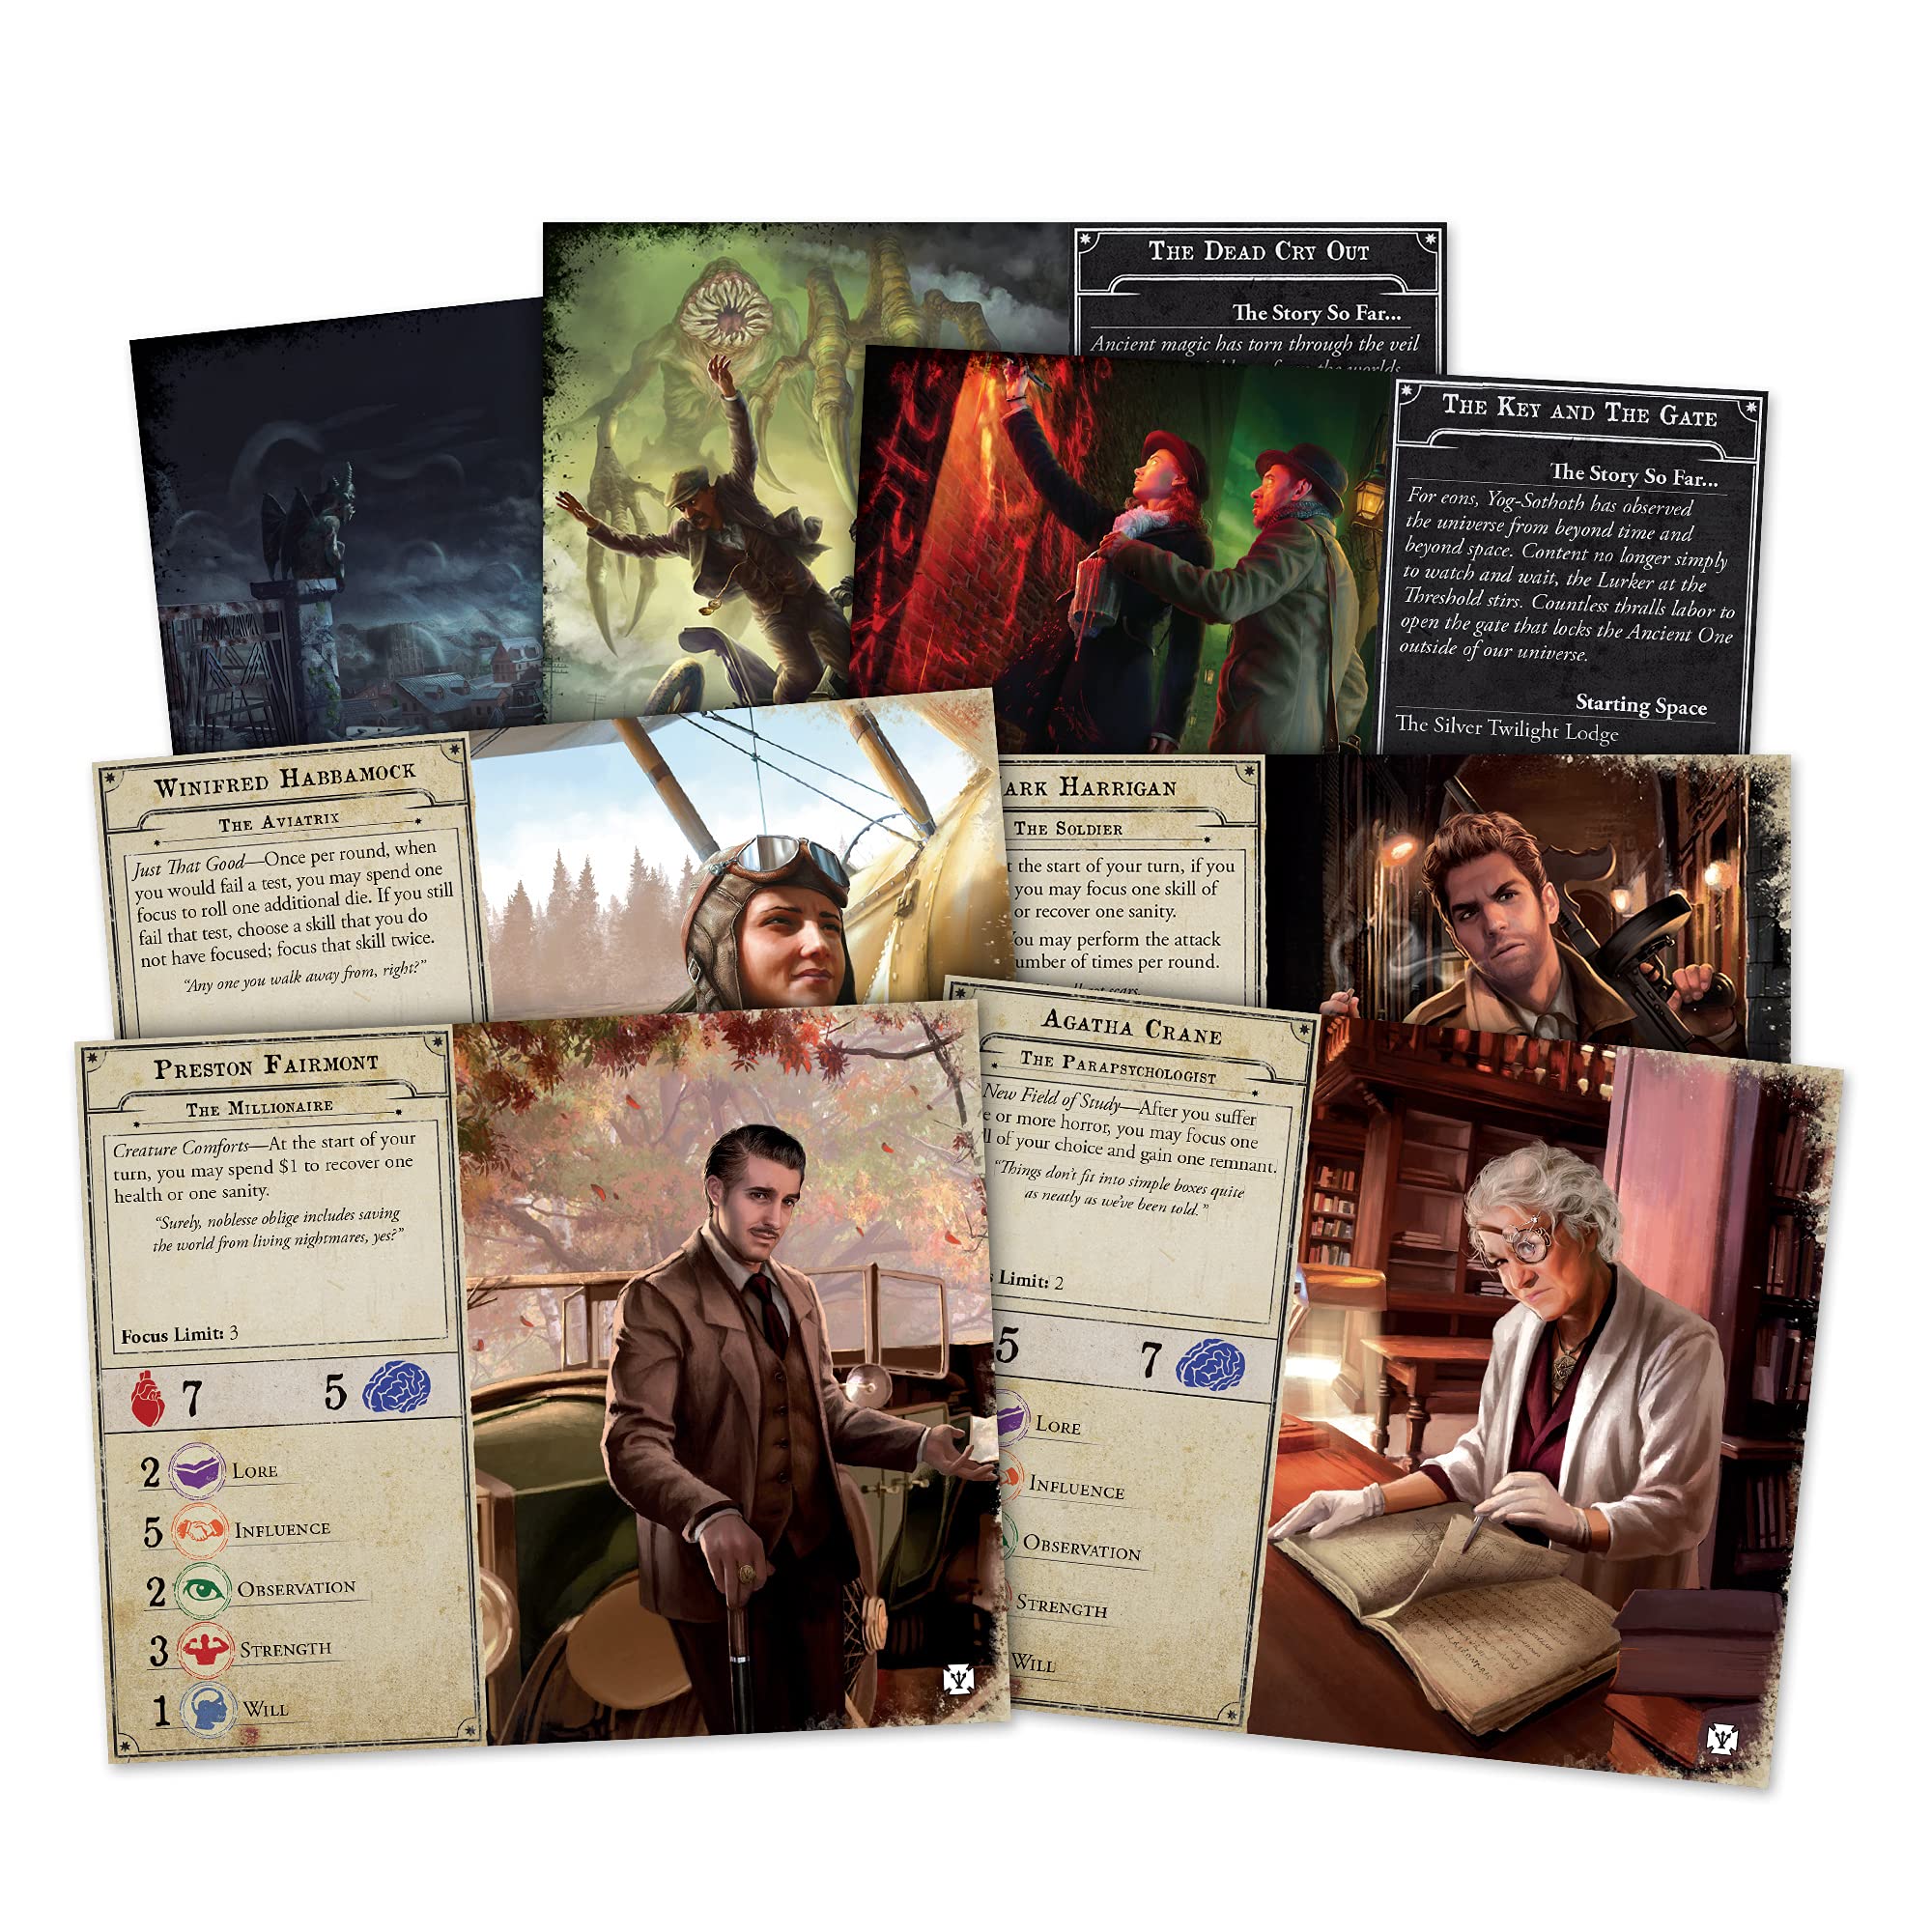 Arkham Horror 3rd Edition Secrets of The Order Board Game Expansion | Mystery Game | Cooperative Board Game for Adults | Ages 14+ | 1-6 Players | Avg Playtime 2-3 Hours | Made by Fantasy Flight Games